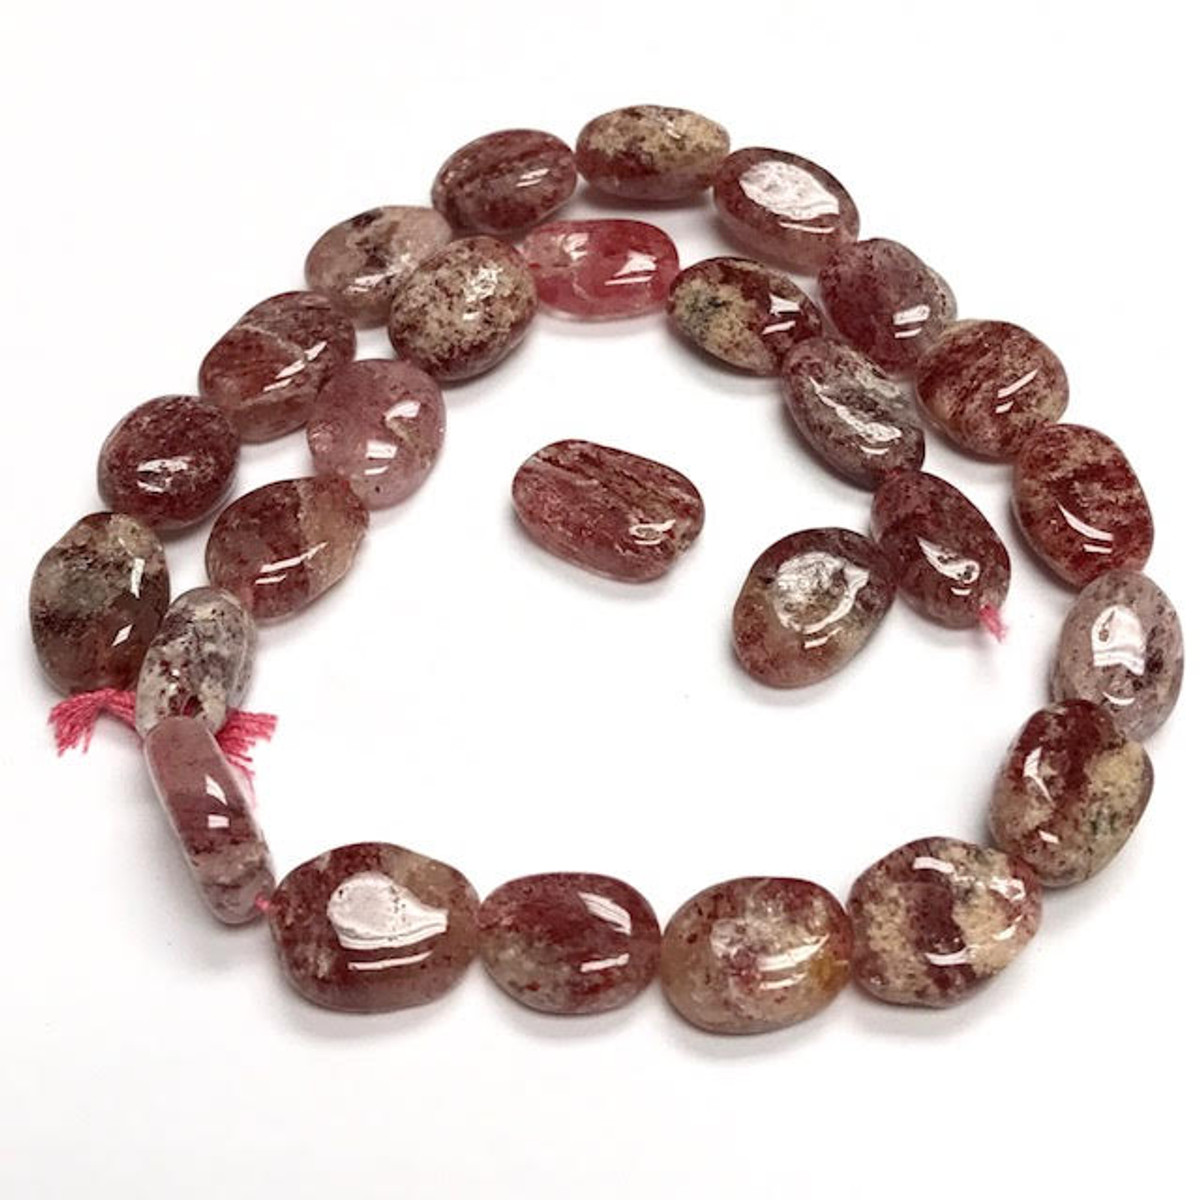 Highly Polished Muscovite Flat Oval Beads